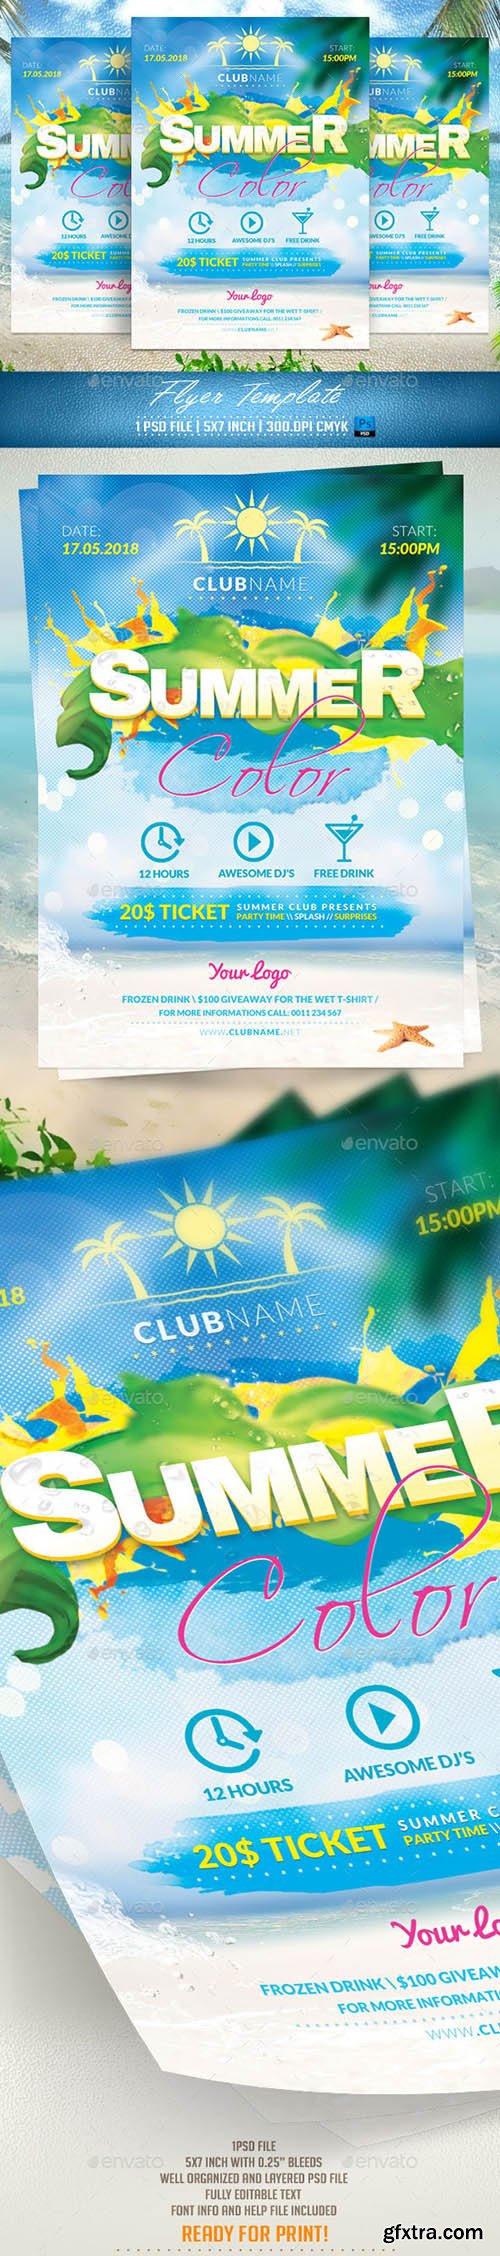 graphicriver-summer-color-flyer-template-11469118-gfxtra